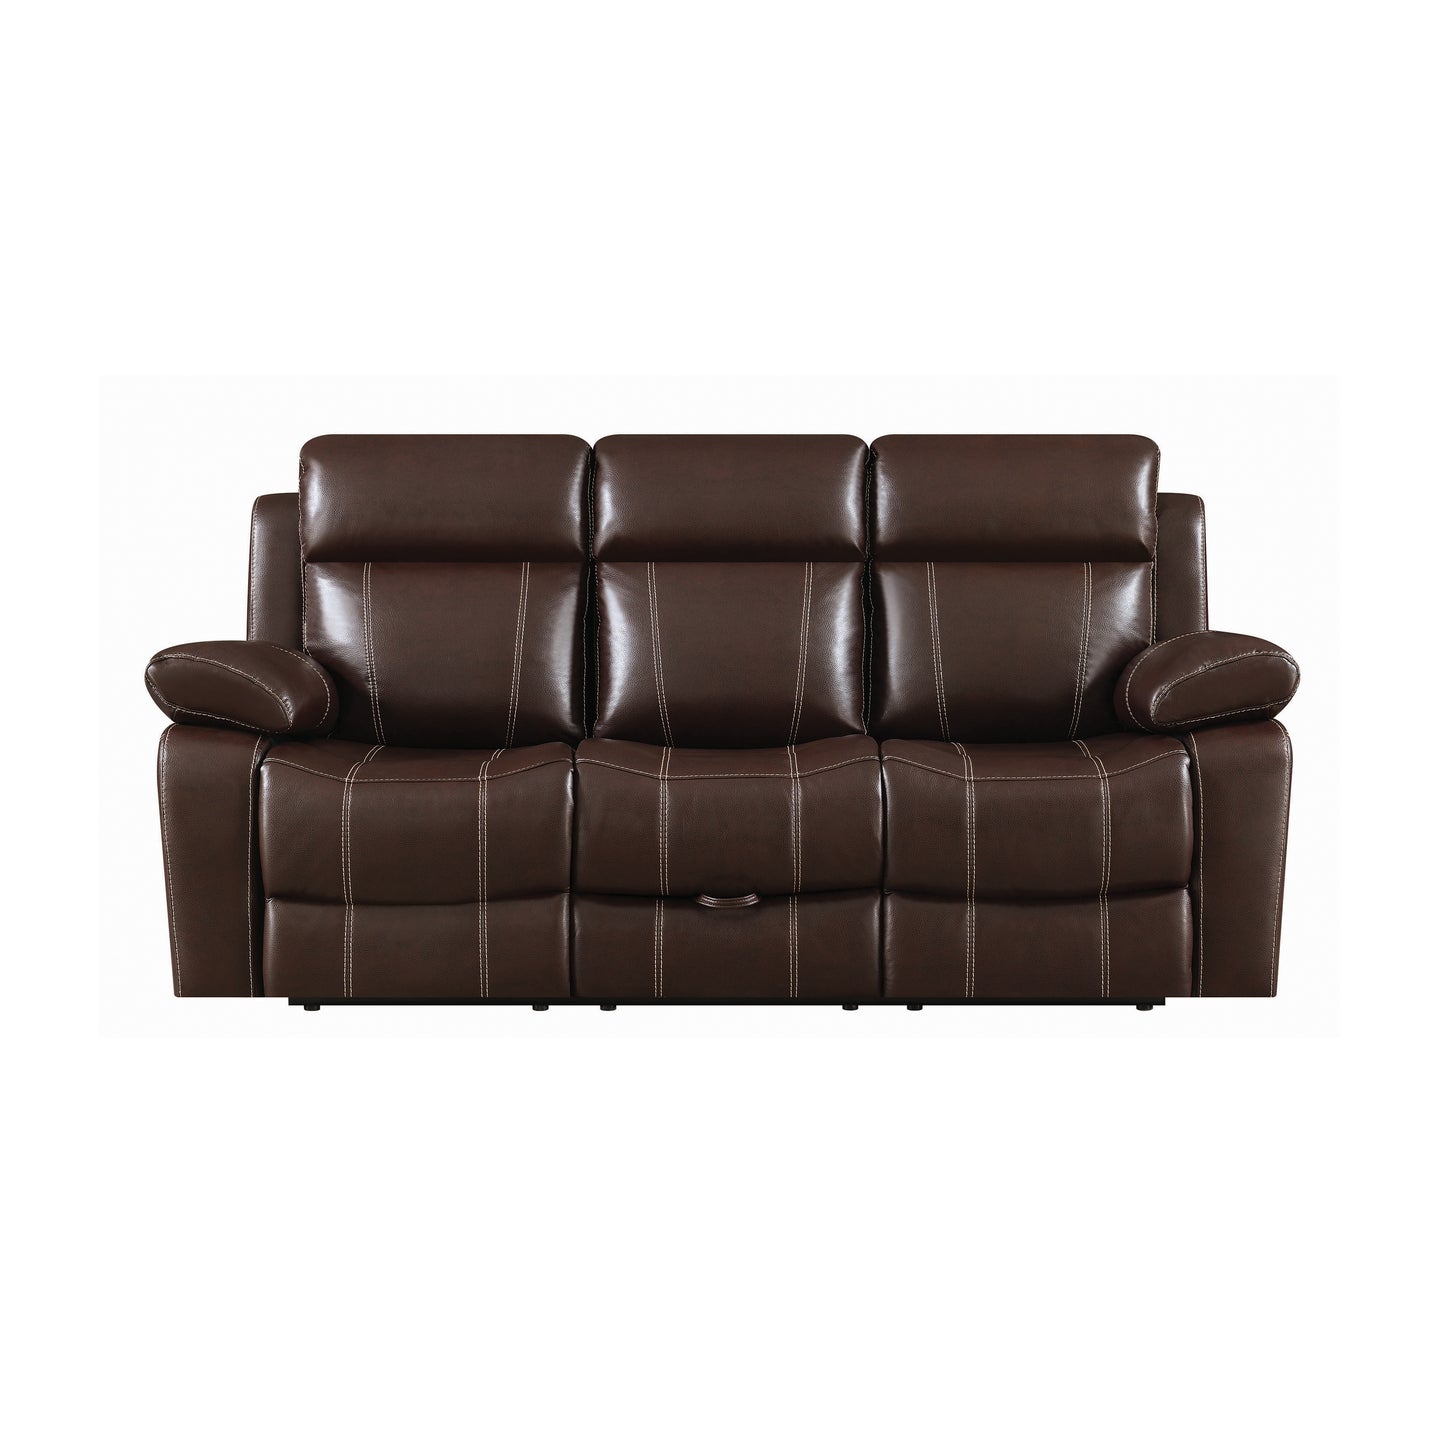 Myleene Motion Sofa with Drop-down Table Chestnut